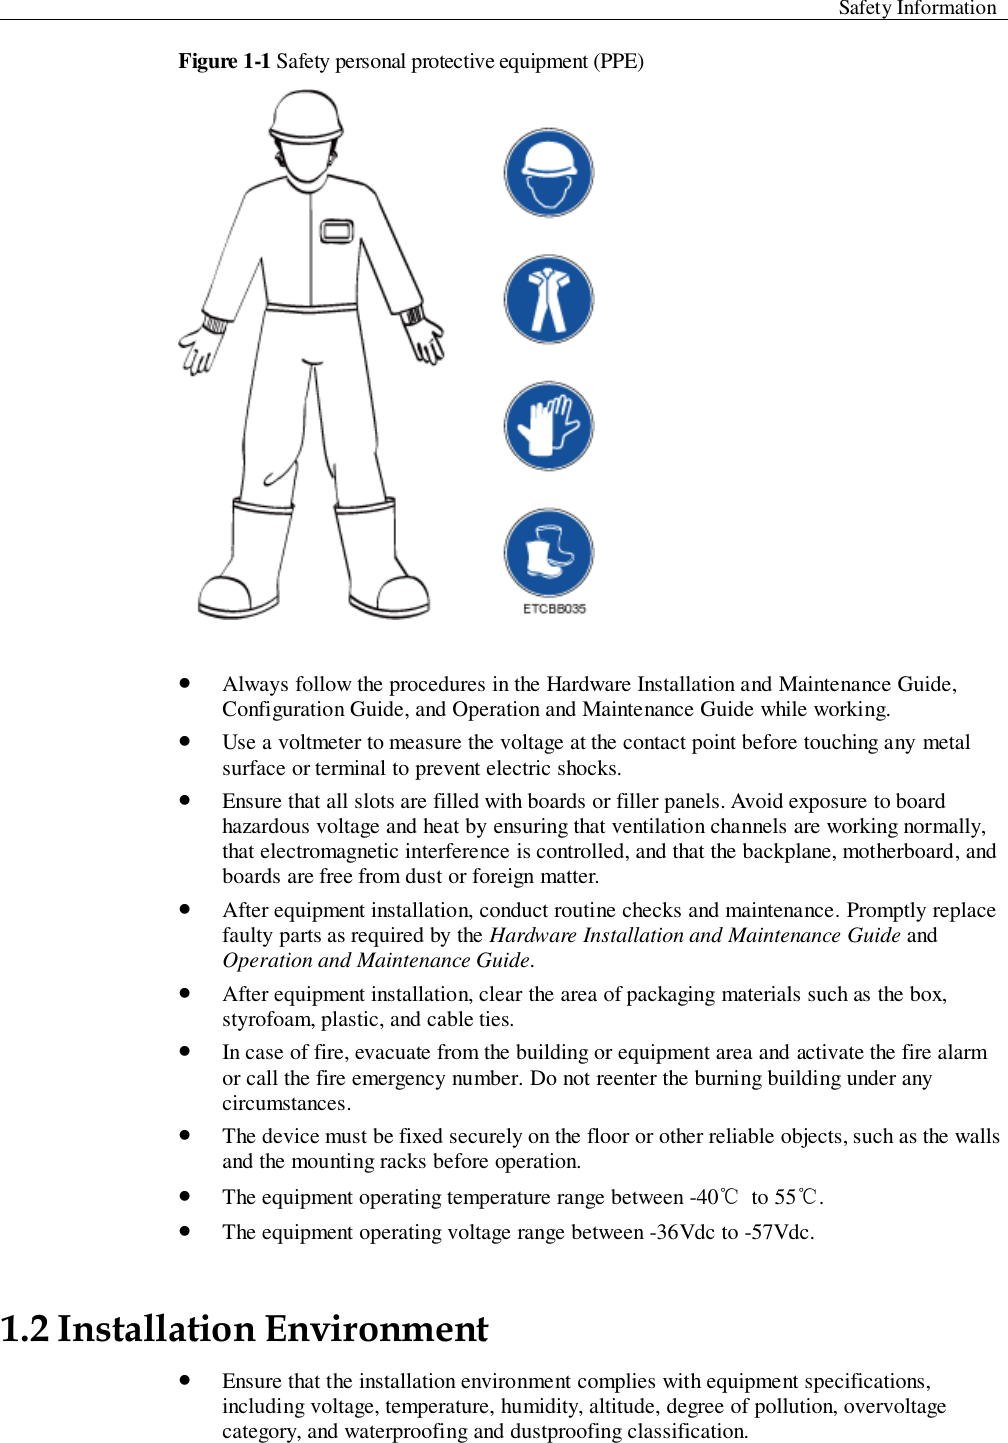  Safety Information  Figure 1-1 Safety personal protective equipment (PPE)    Always follow the procedures in the Hardware Installation and Maintenance Guide, Configuration Guide, and Operation and Maintenance Guide while working.  Use a voltmeter to measure the voltage at the contact point before touching any metal surface or terminal to prevent electric shocks.    Ensure that all slots are filled with boards or filler panels. Avoid exposure to board hazardous voltage and heat by ensuring that ventilation channels are working normally, that electromagnetic interference is controlled, and that the backplane, motherboard, and boards are free from dust or foreign matter.    After equipment installation, conduct routine checks and maintenance. Promptly replace faulty parts as required by the Hardware Installation and Maintenance Guide and Operation and Maintenance Guide.    After equipment installation, clear the area of packaging materials such as the box, styrofoam, plastic, and cable ties.  In case of fire, evacuate from the building or equipment area and activate the fire alarm or call the fire emergency number. Do not reenter the burning building under any circumstances.    The device must be fixed securely on the floor or other reliable objects, such as the walls and the mounting racks before operation.  The equipment operating temperature range between -40℃  to 55℃.  The equipment operating voltage range between -36Vdc to -57Vdc. 1.2 Installation Environment    Ensure that the installation environment complies with equipment specifications, including voltage, temperature, humidity, altitude, degree of pollution, overvoltage category, and waterproofing and dustproofing classification. 